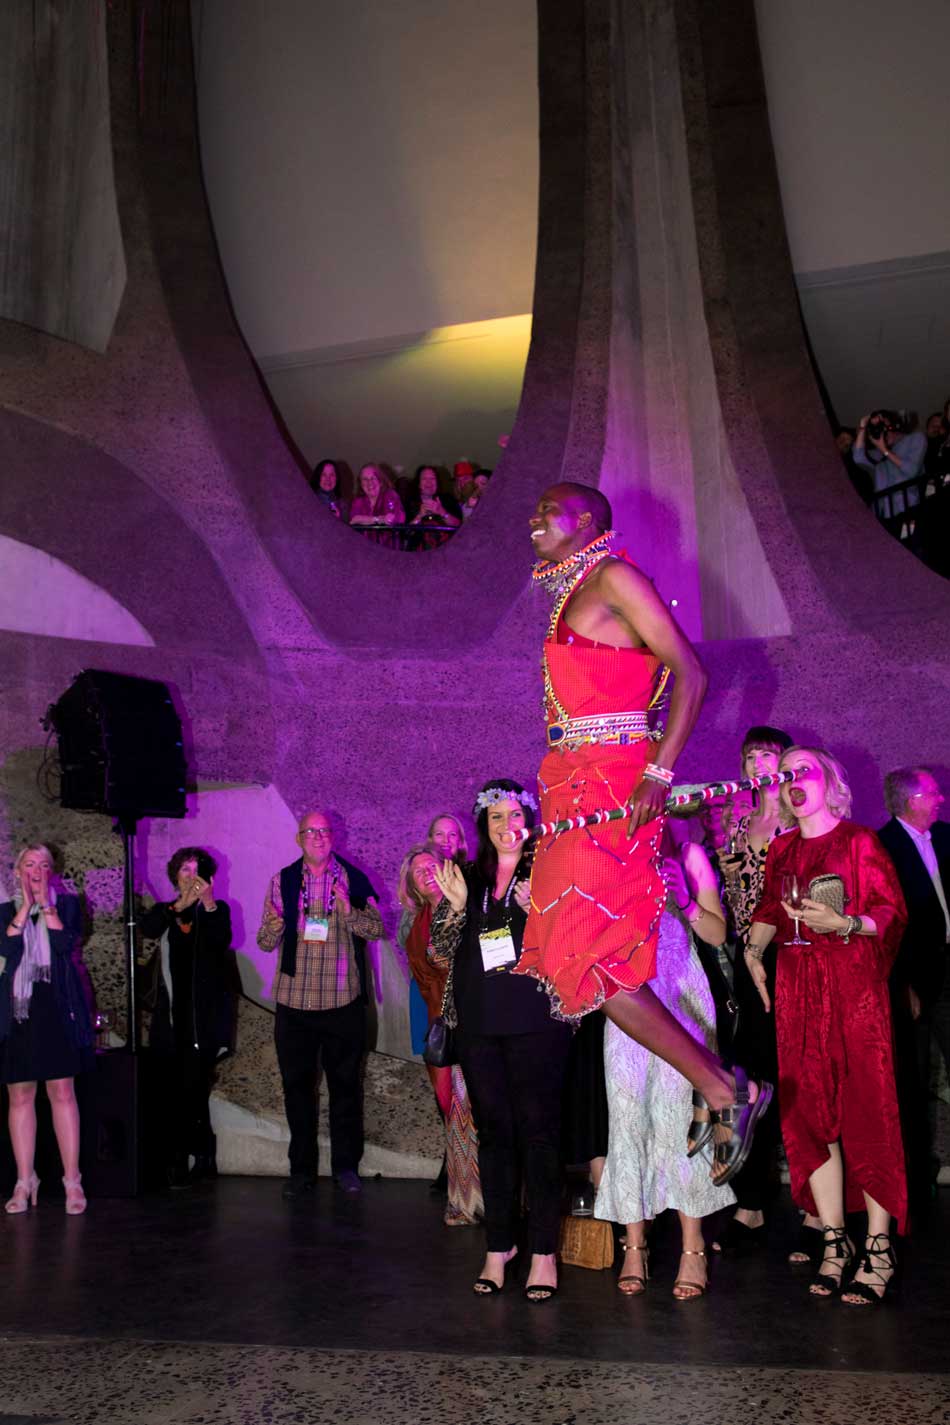 Jackson jumped for joy as he was announced the winner at Zeitz MOCAA